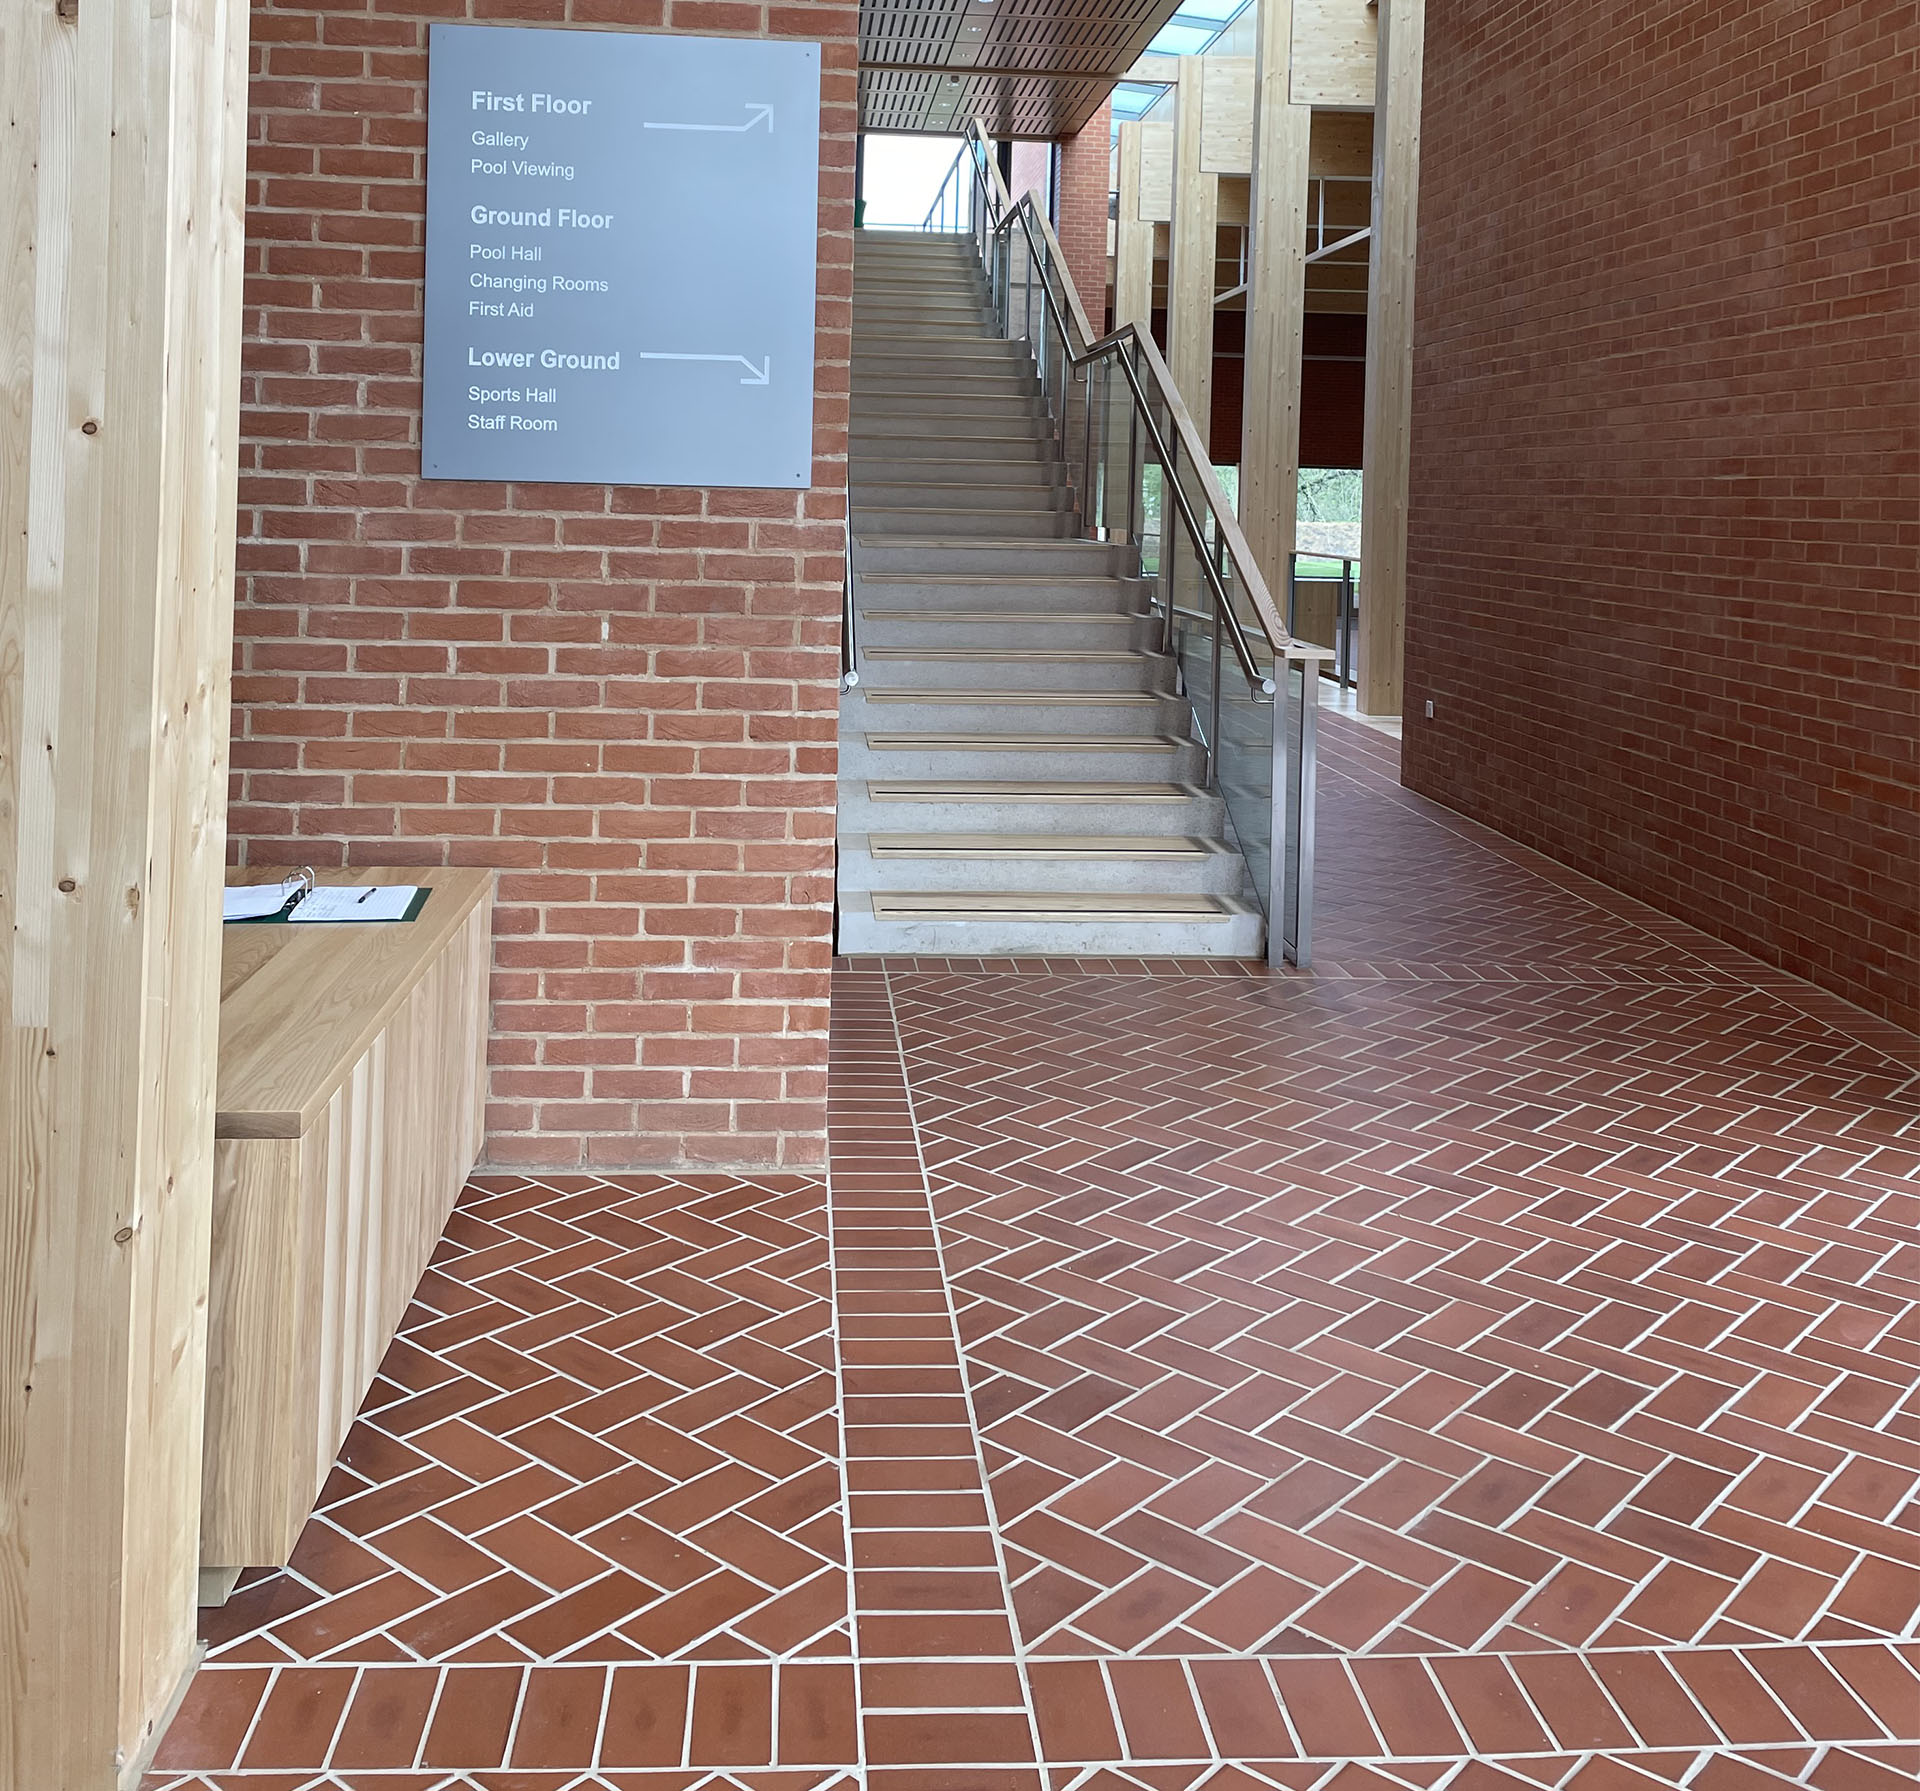 Ketley Staffs red quarry tiles at the new Aquatic Centre at Eton College